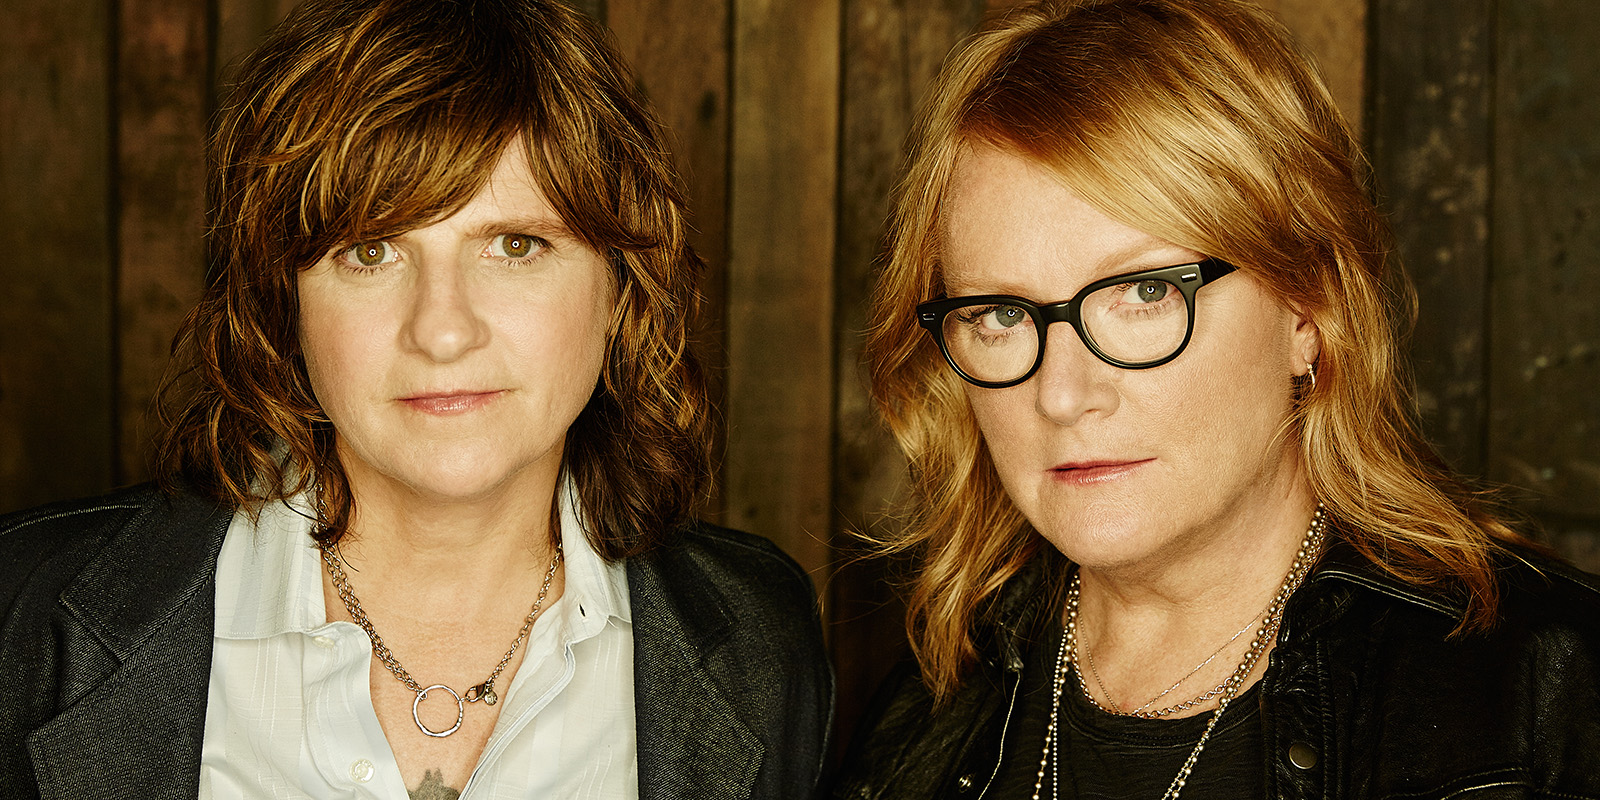 Amy Ray and Emily Saliers wear white and black clothing and look at the camera